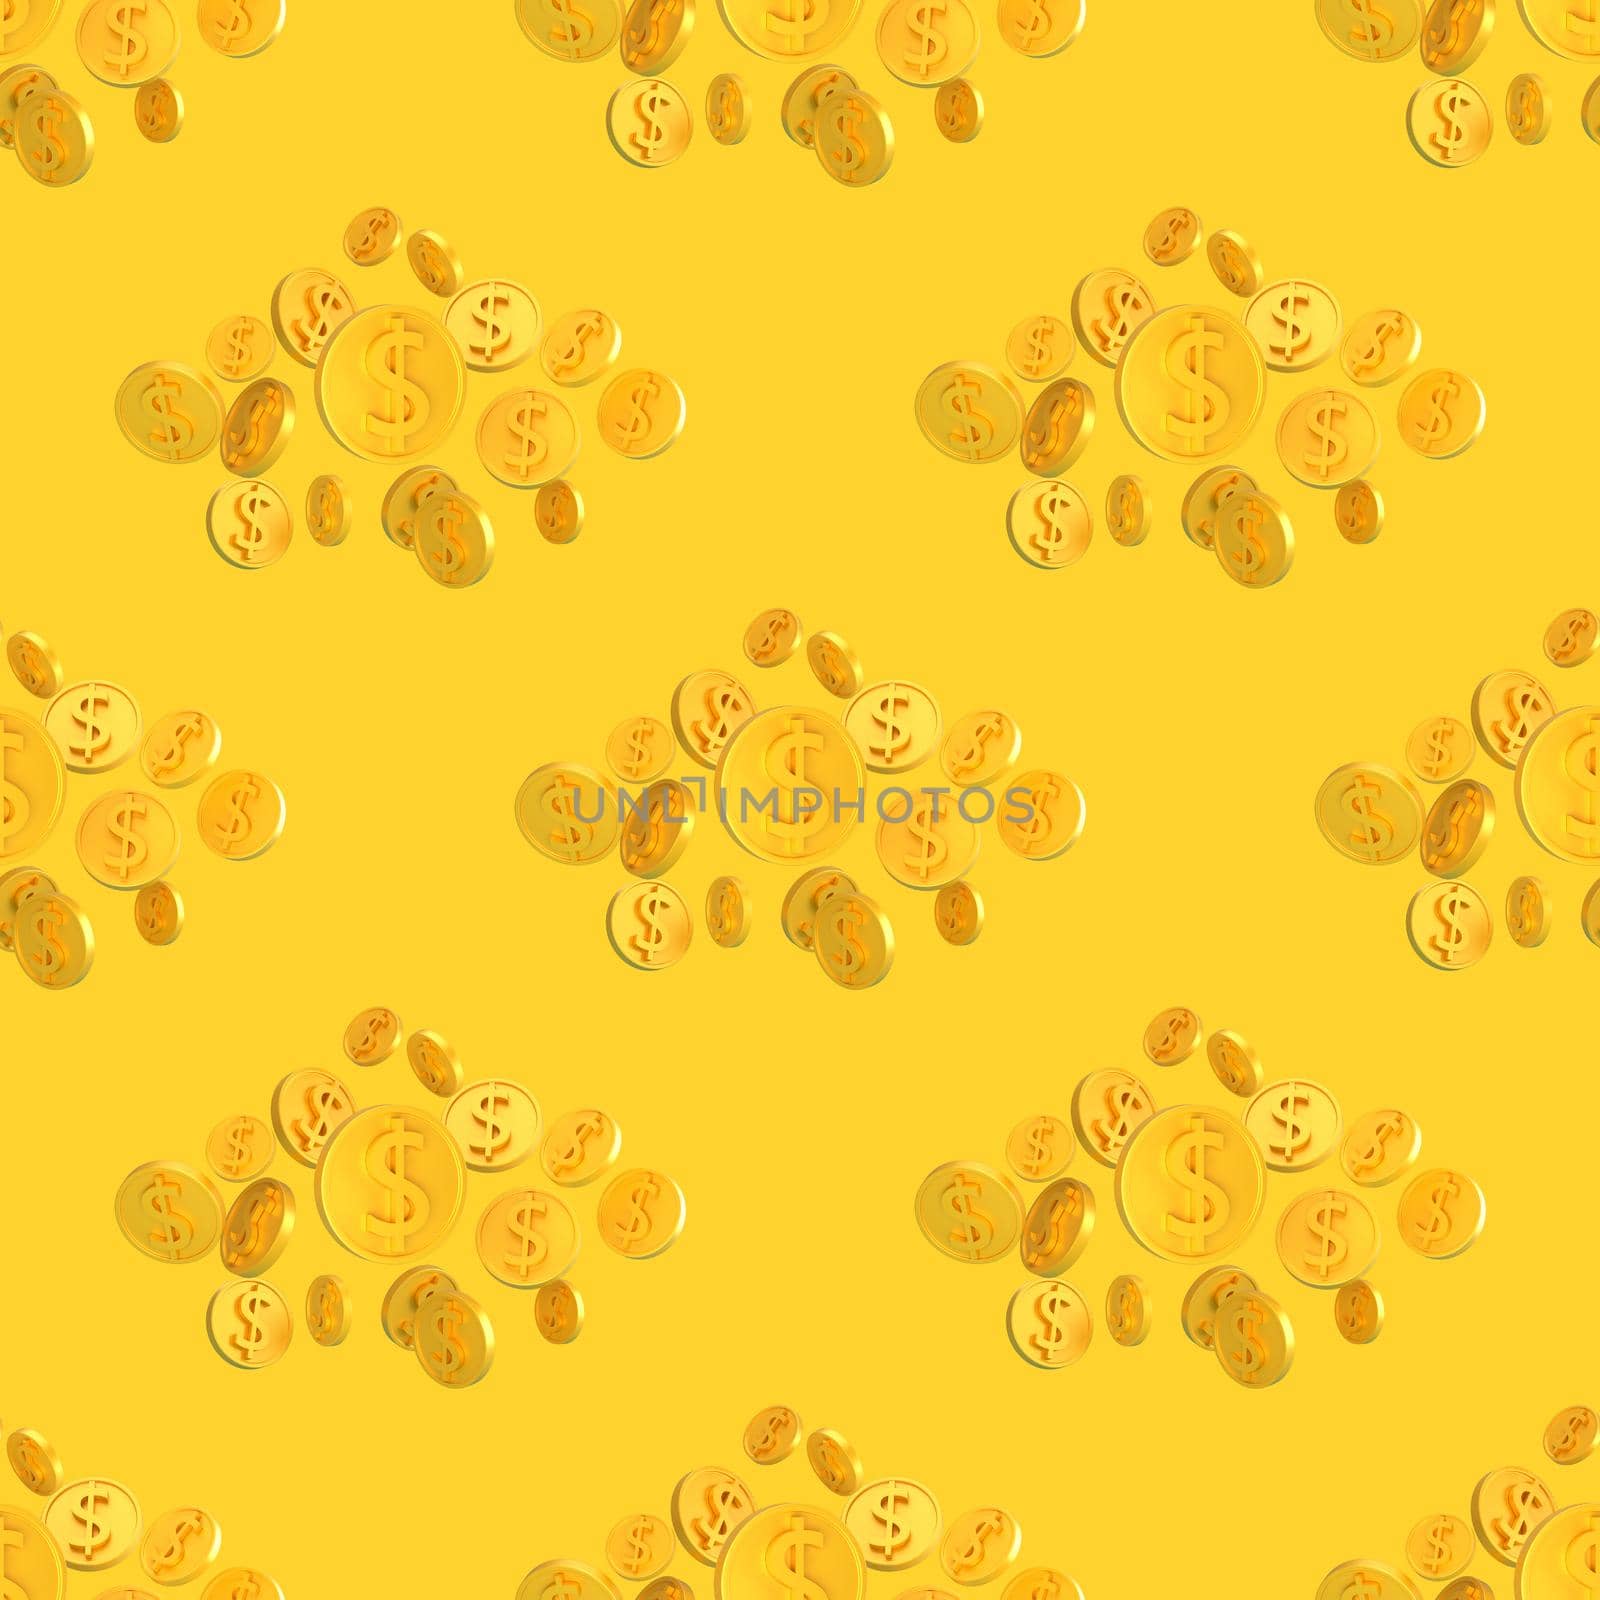 Realistic Gold 3d coins with dollar sign seamless pattern. Seamless wrapping pattern of shiny money 3d render illustration